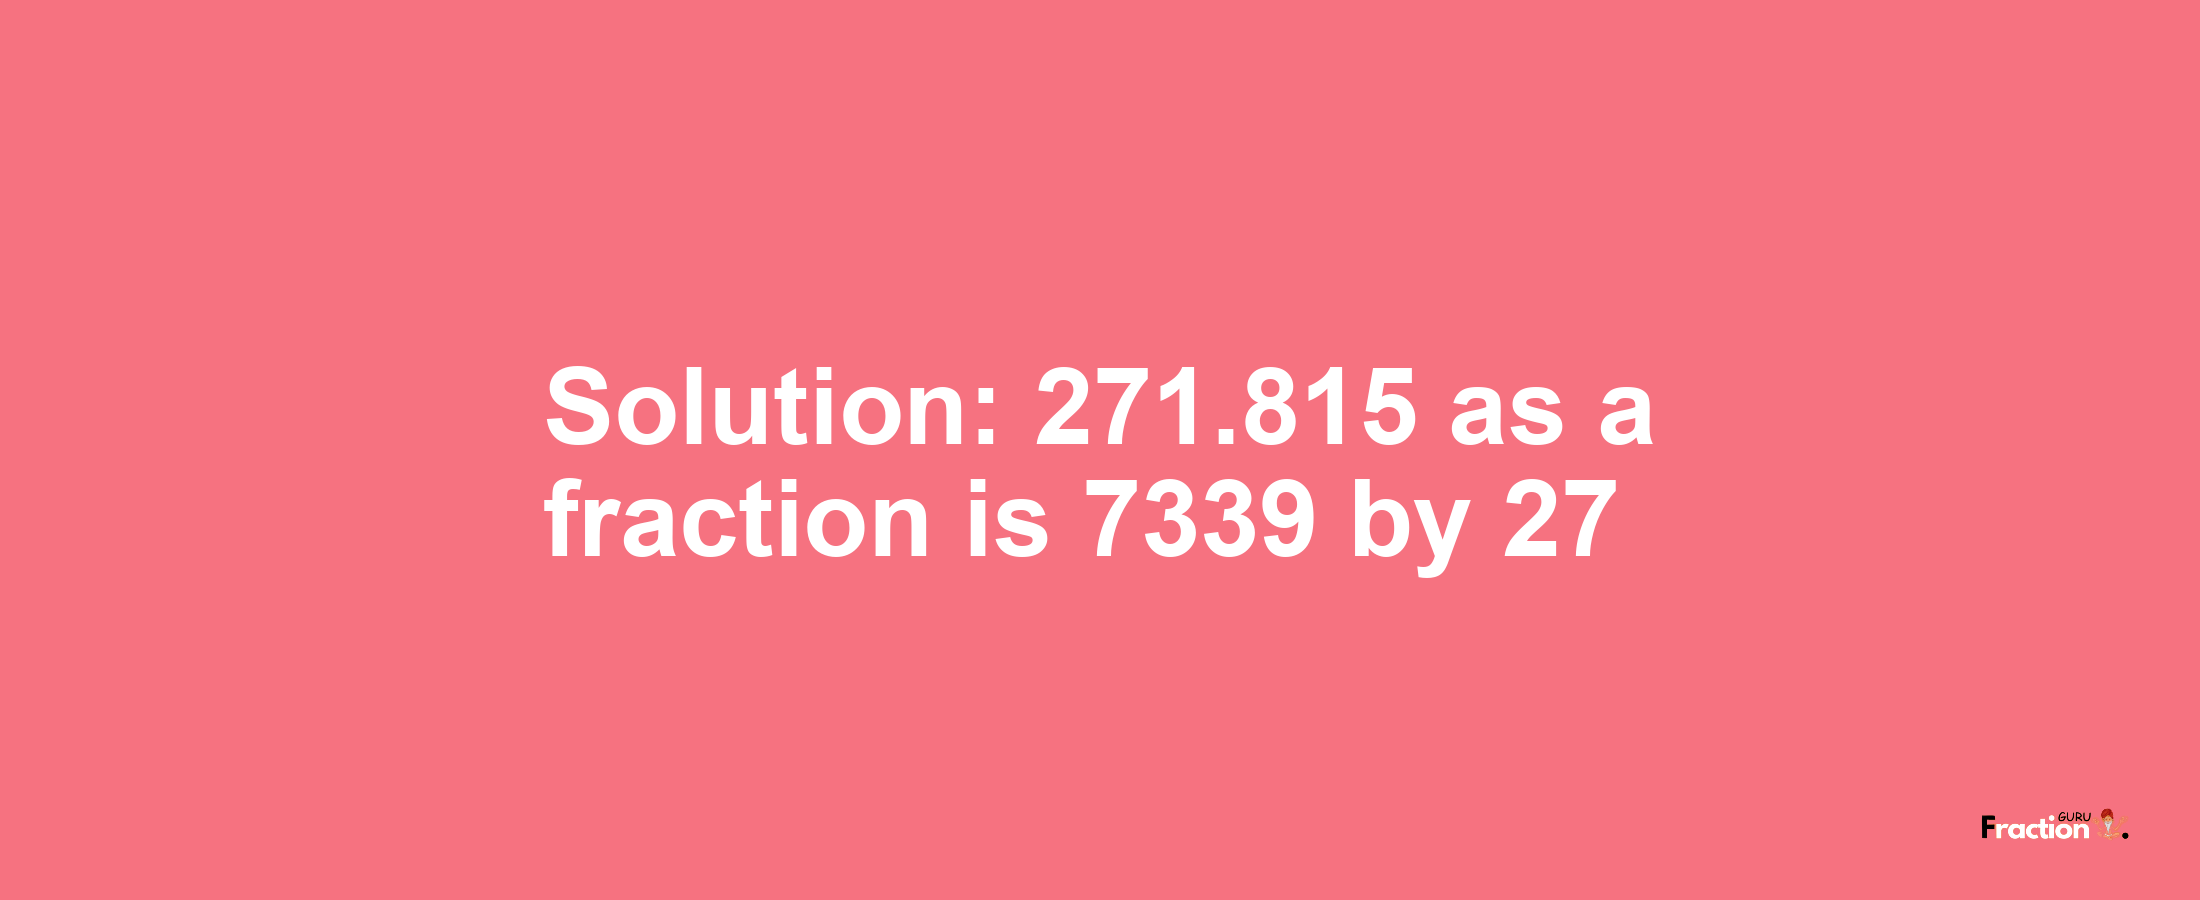 Solution:271.815 as a fraction is 7339/27